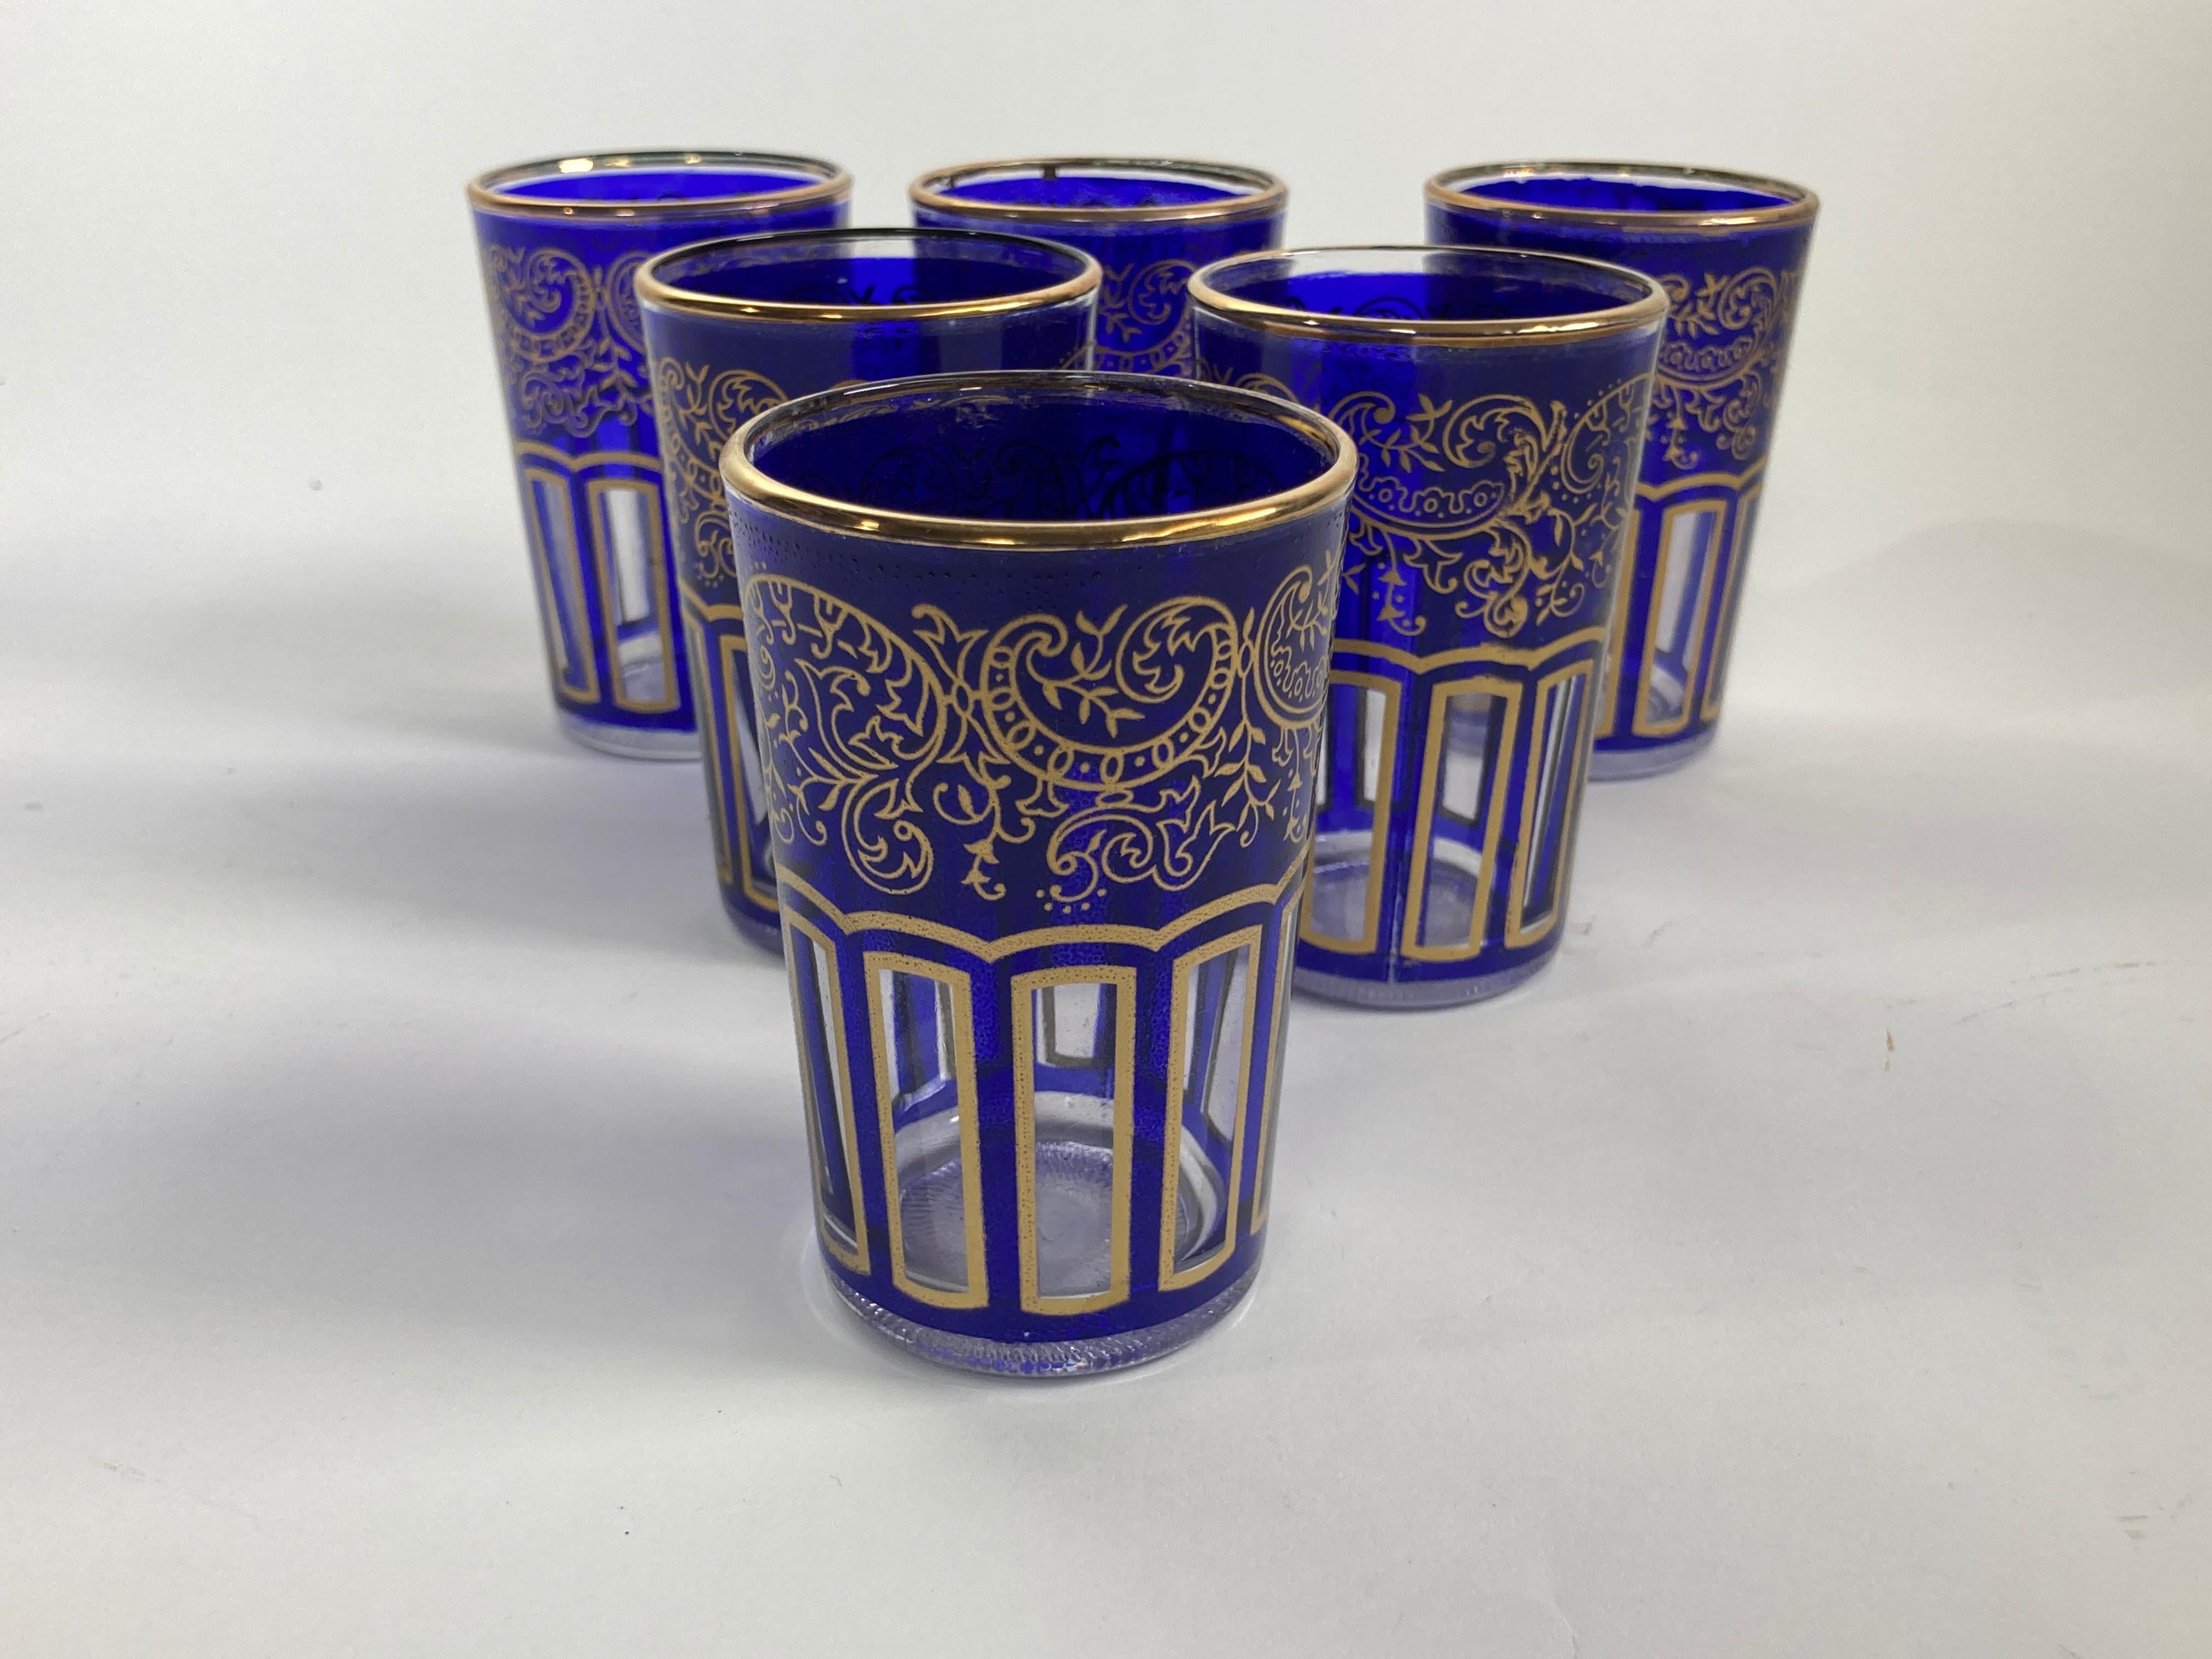 Moroccan Royal Blue Shot Glasses with Gold Moorish Design Set of 6.
Set of six royal cobalt blue shot drinking glasses barware with gold Moorish design.
These beautiful Moroccan drinking glasses are decorated with a classical arabesque gold pattern